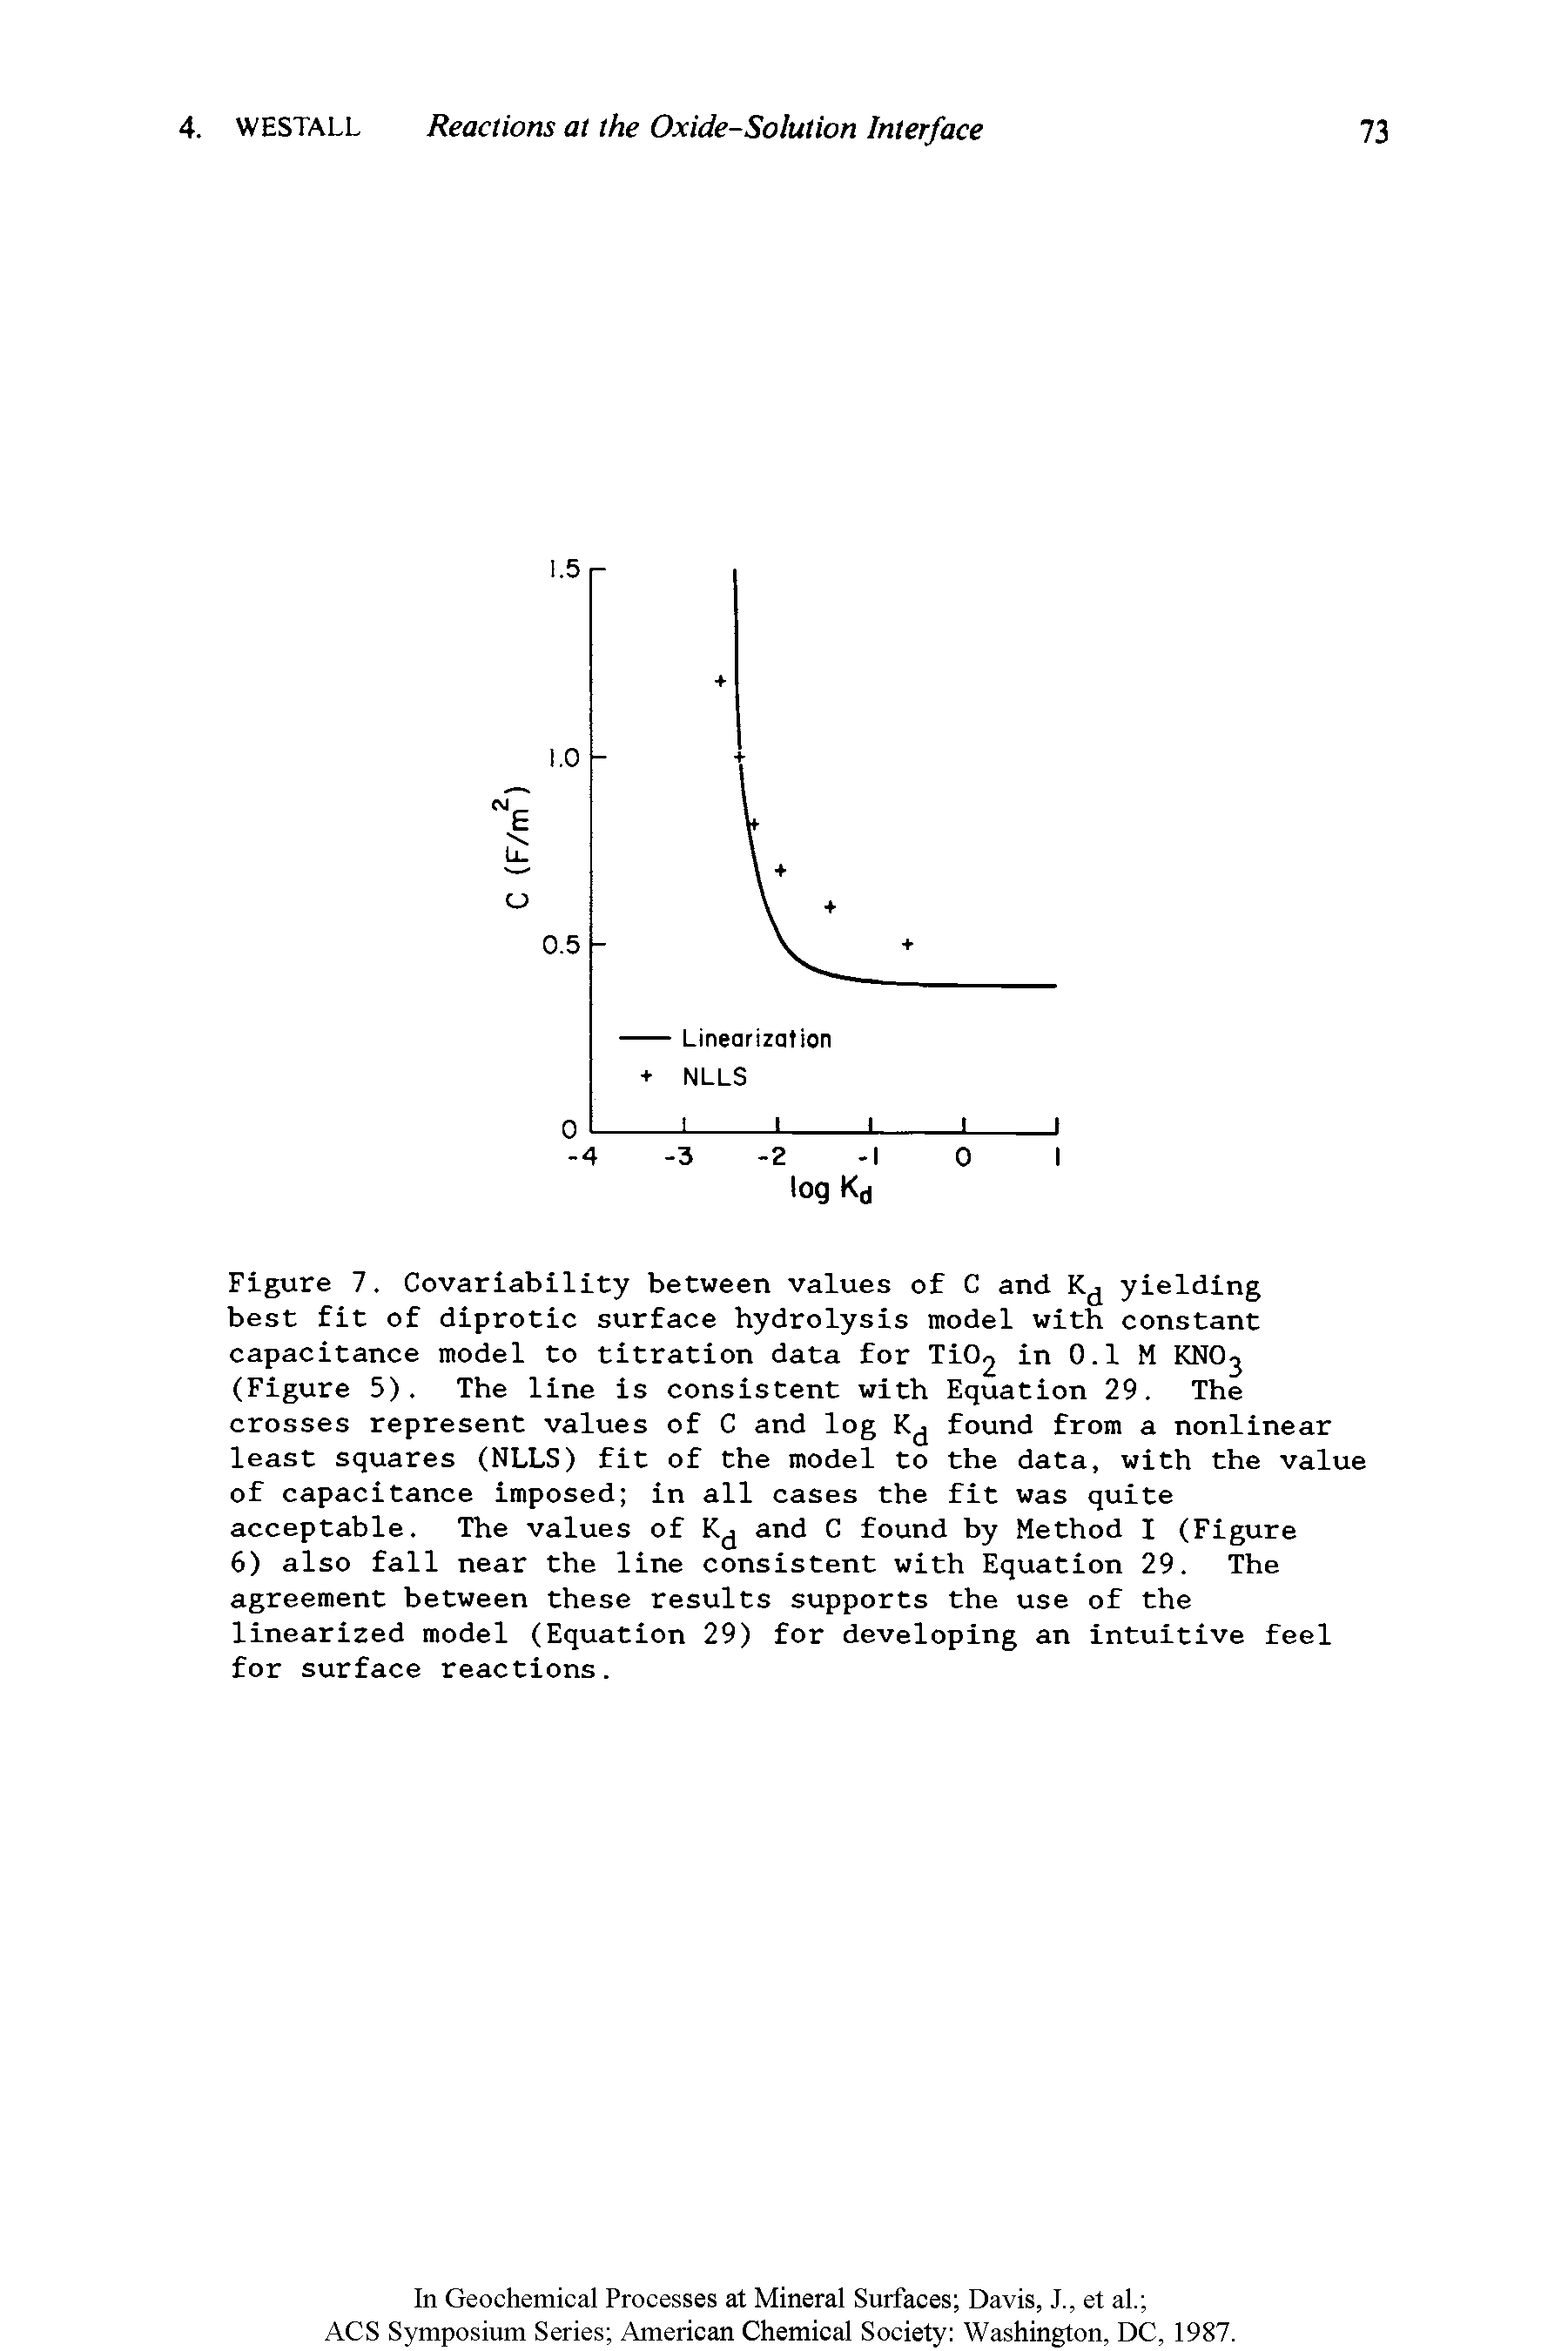 Figure 7. Covariability between values of C and Kd yielding best fit of diprotic surface hydrolysis model with constant capacitance model to titration data for TiC>2 in 0.1 M KNOj (Figure 5). The line is consistent with Equation 29. The crosses represent values of C and log found from a nonlinear least squares (NLLS) fit of the model to the data, with the value of capacitance imposed in all cases the fit was quite acceptable. The values of and C found by Method I (Figure 6) also fall near the line consistent with Equation 29. The agreement between these results supports the use of the linearized model (Equation 29) for developing an intuitive feel for surface reactions.